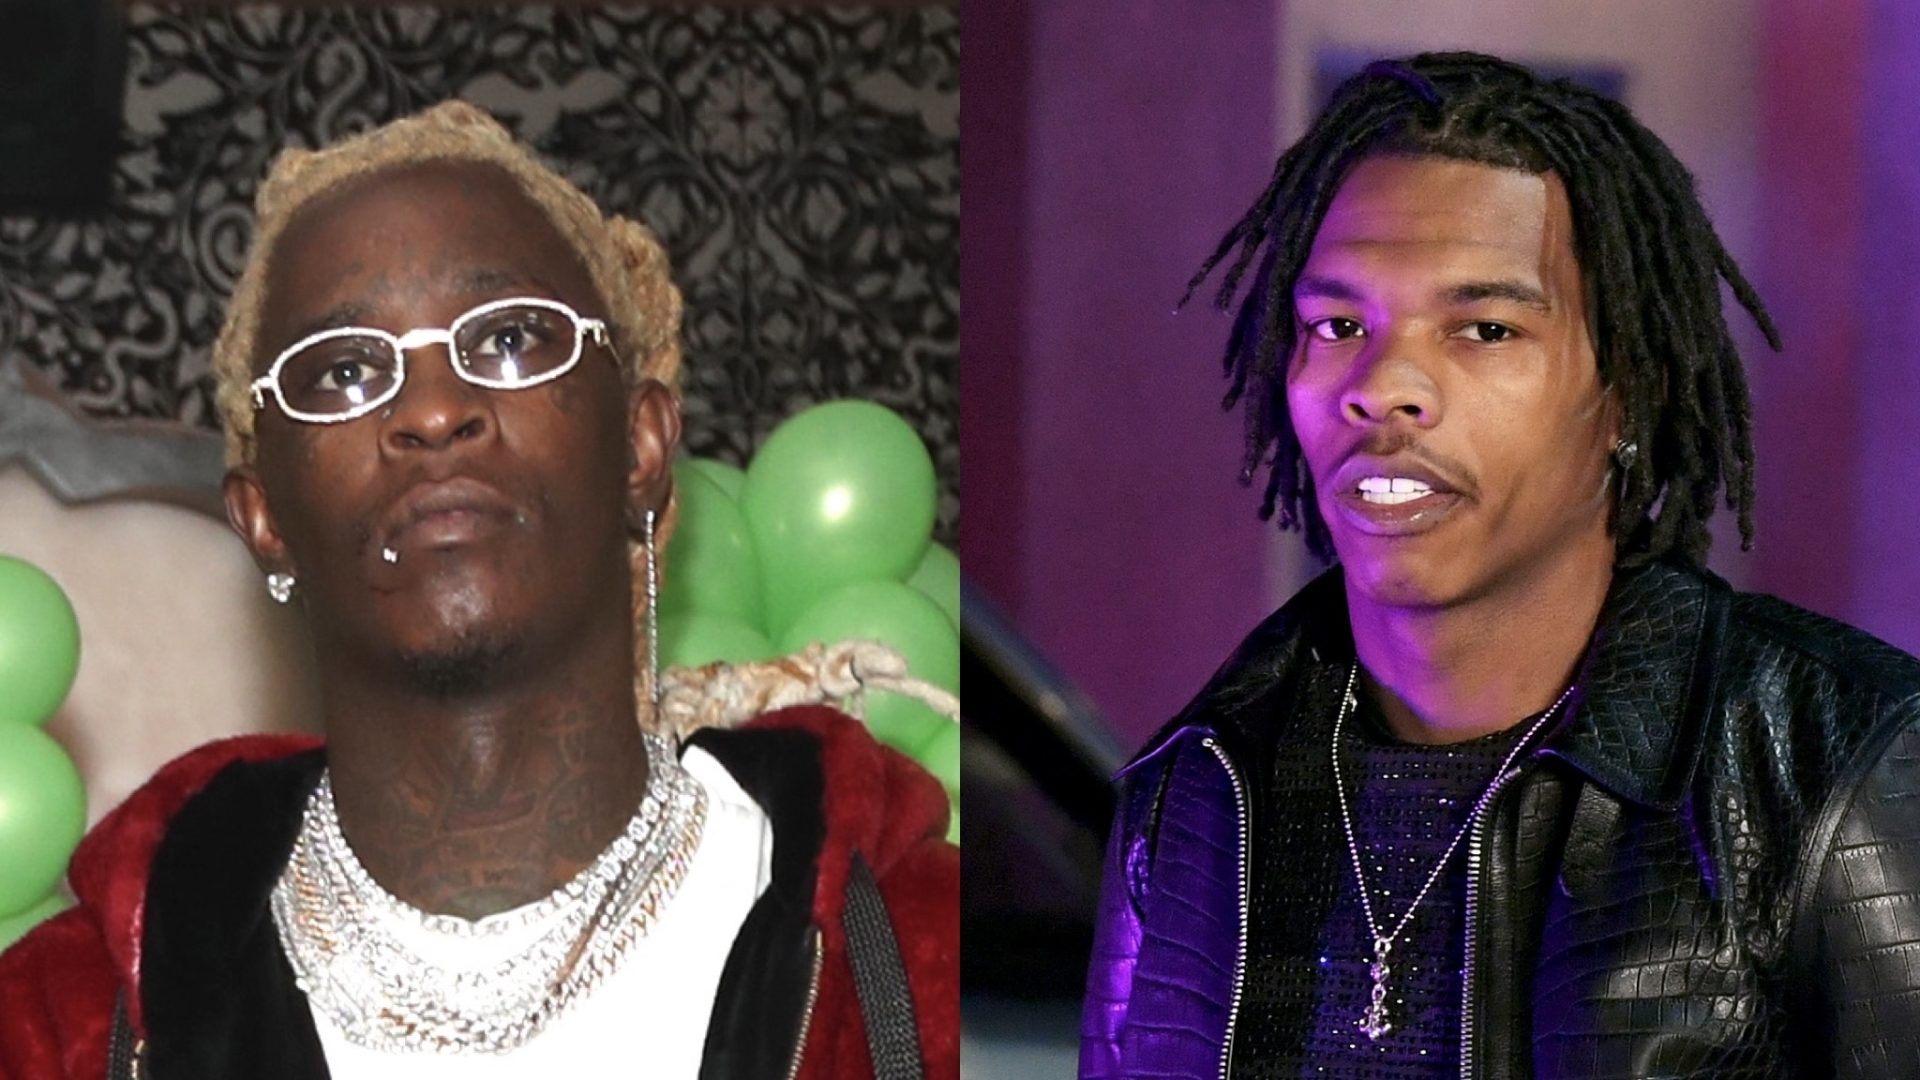 Oop! Young Thug's Father Shares Words For Lil Baby While Addressing The Rapper's Criticism Of Gunna